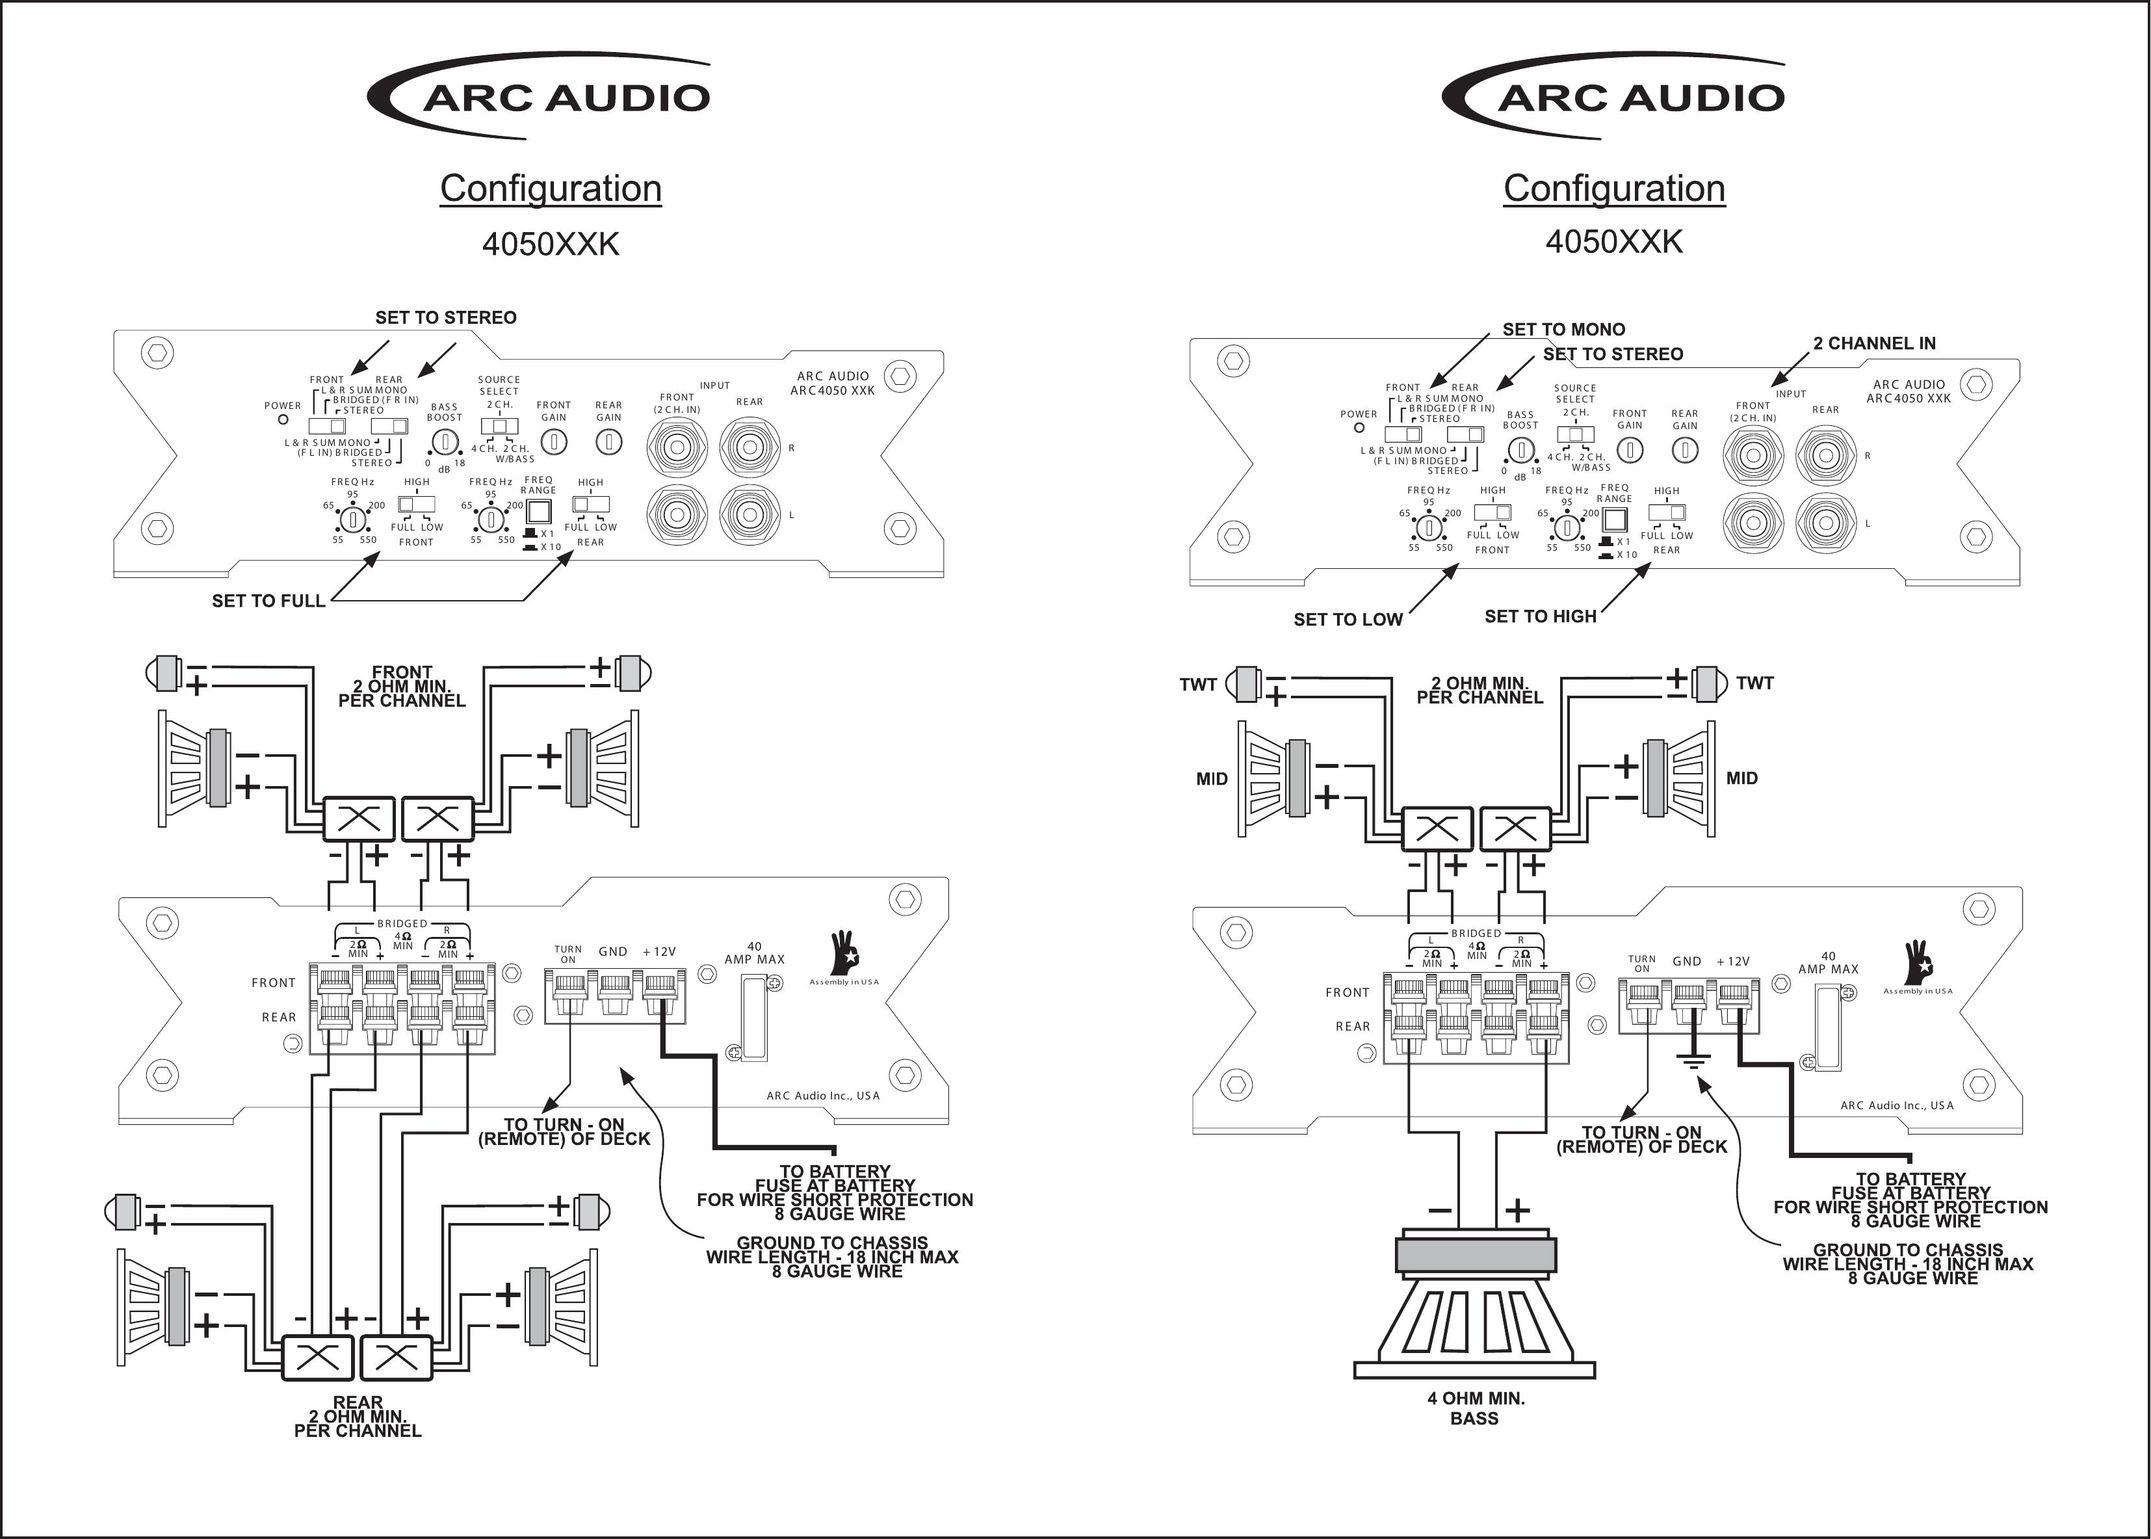 ARC Audio 1T8 Stereo System User Manual